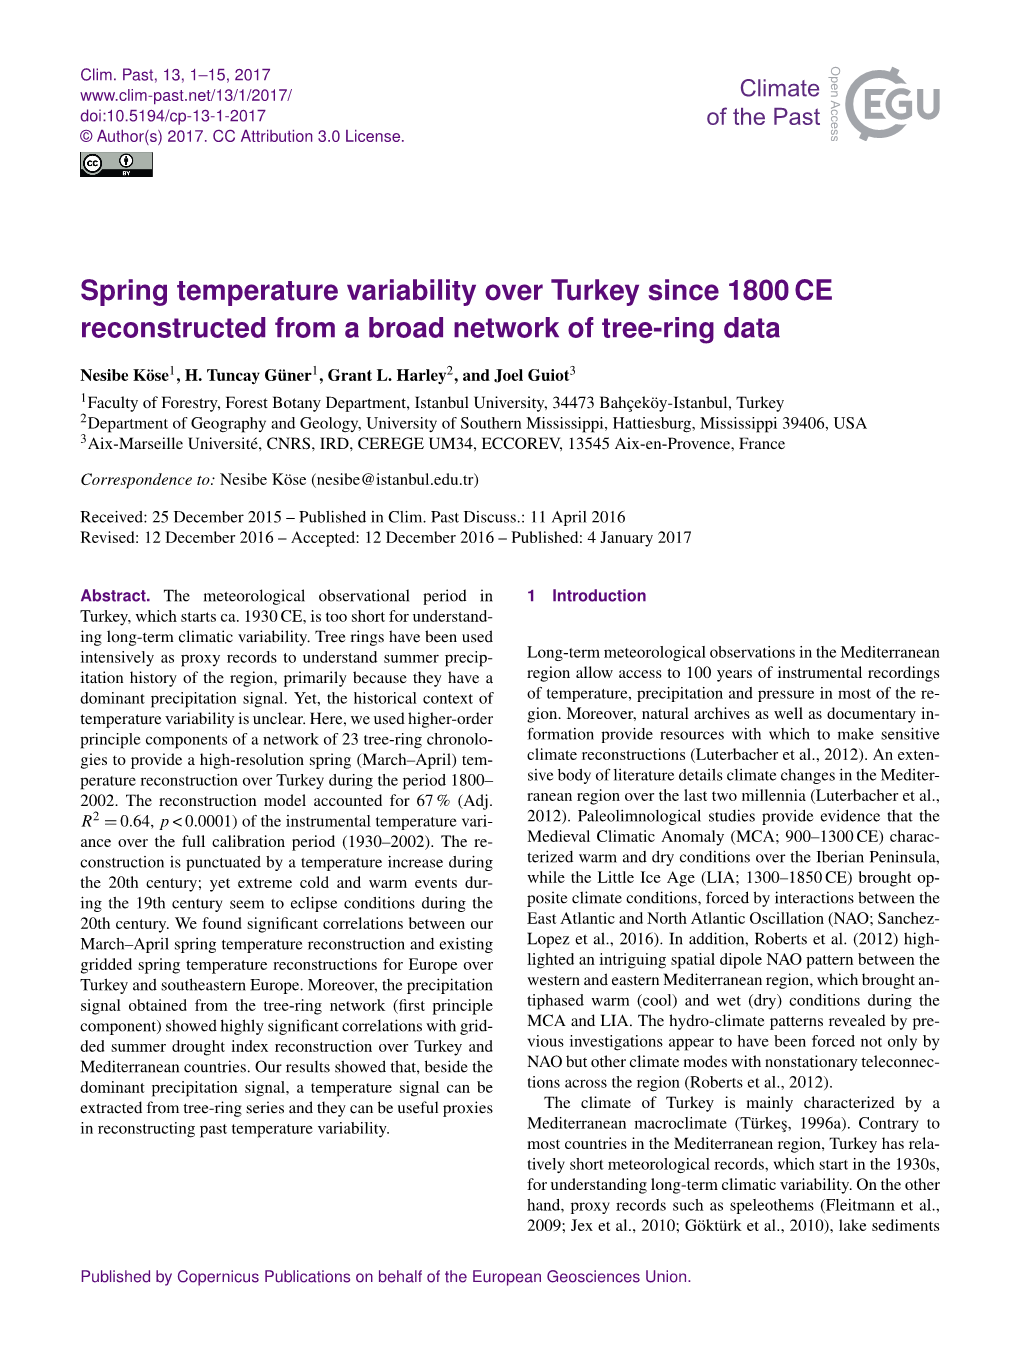 Spring Temperature Variability Over Turkey Since 1800 CE Reconstructed from a Broad Network of Tree-Ring Data